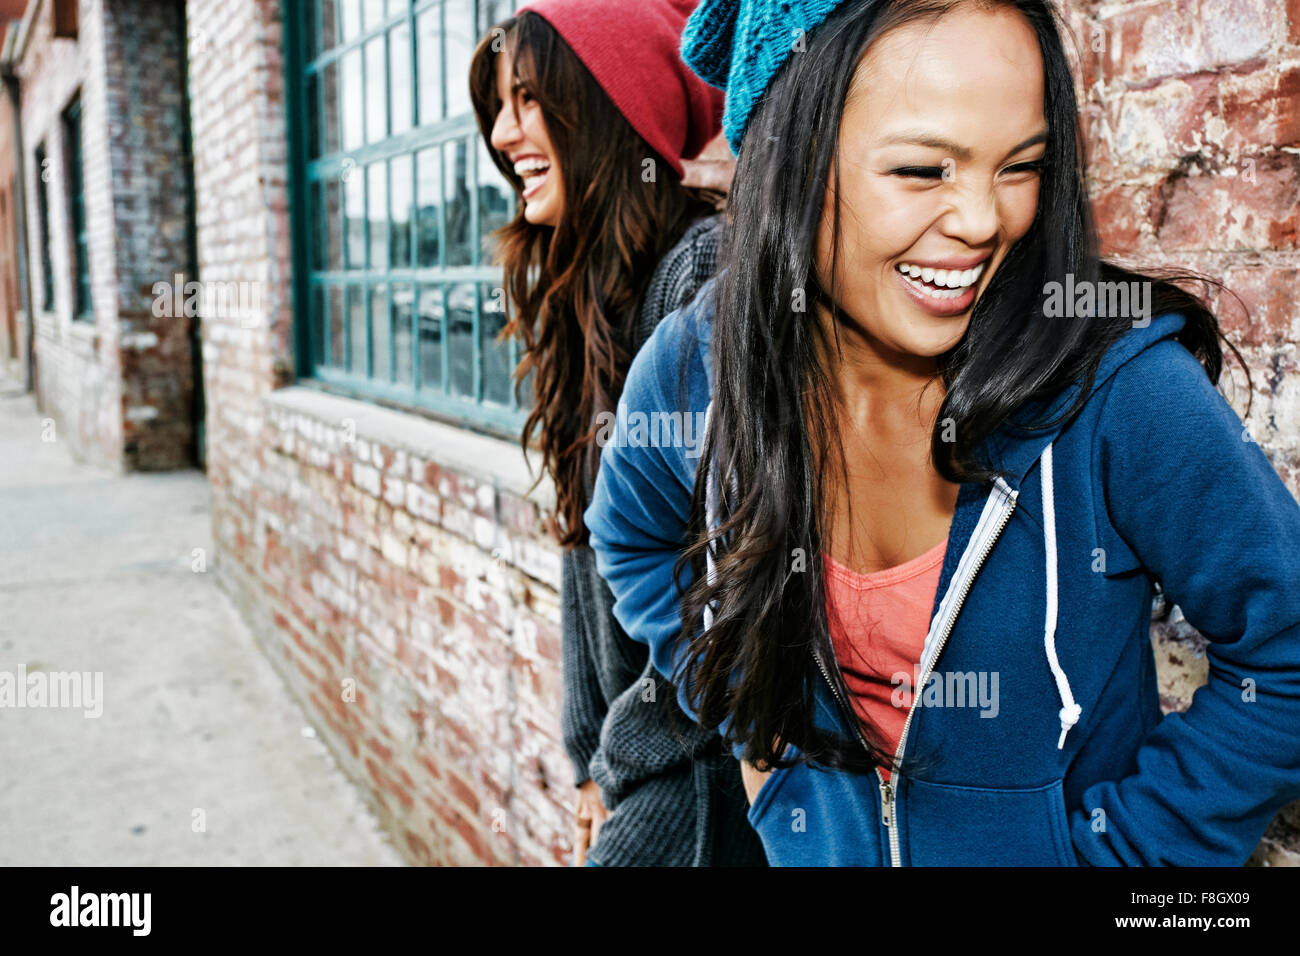 Women laughing in front of brick wall Stock Photo